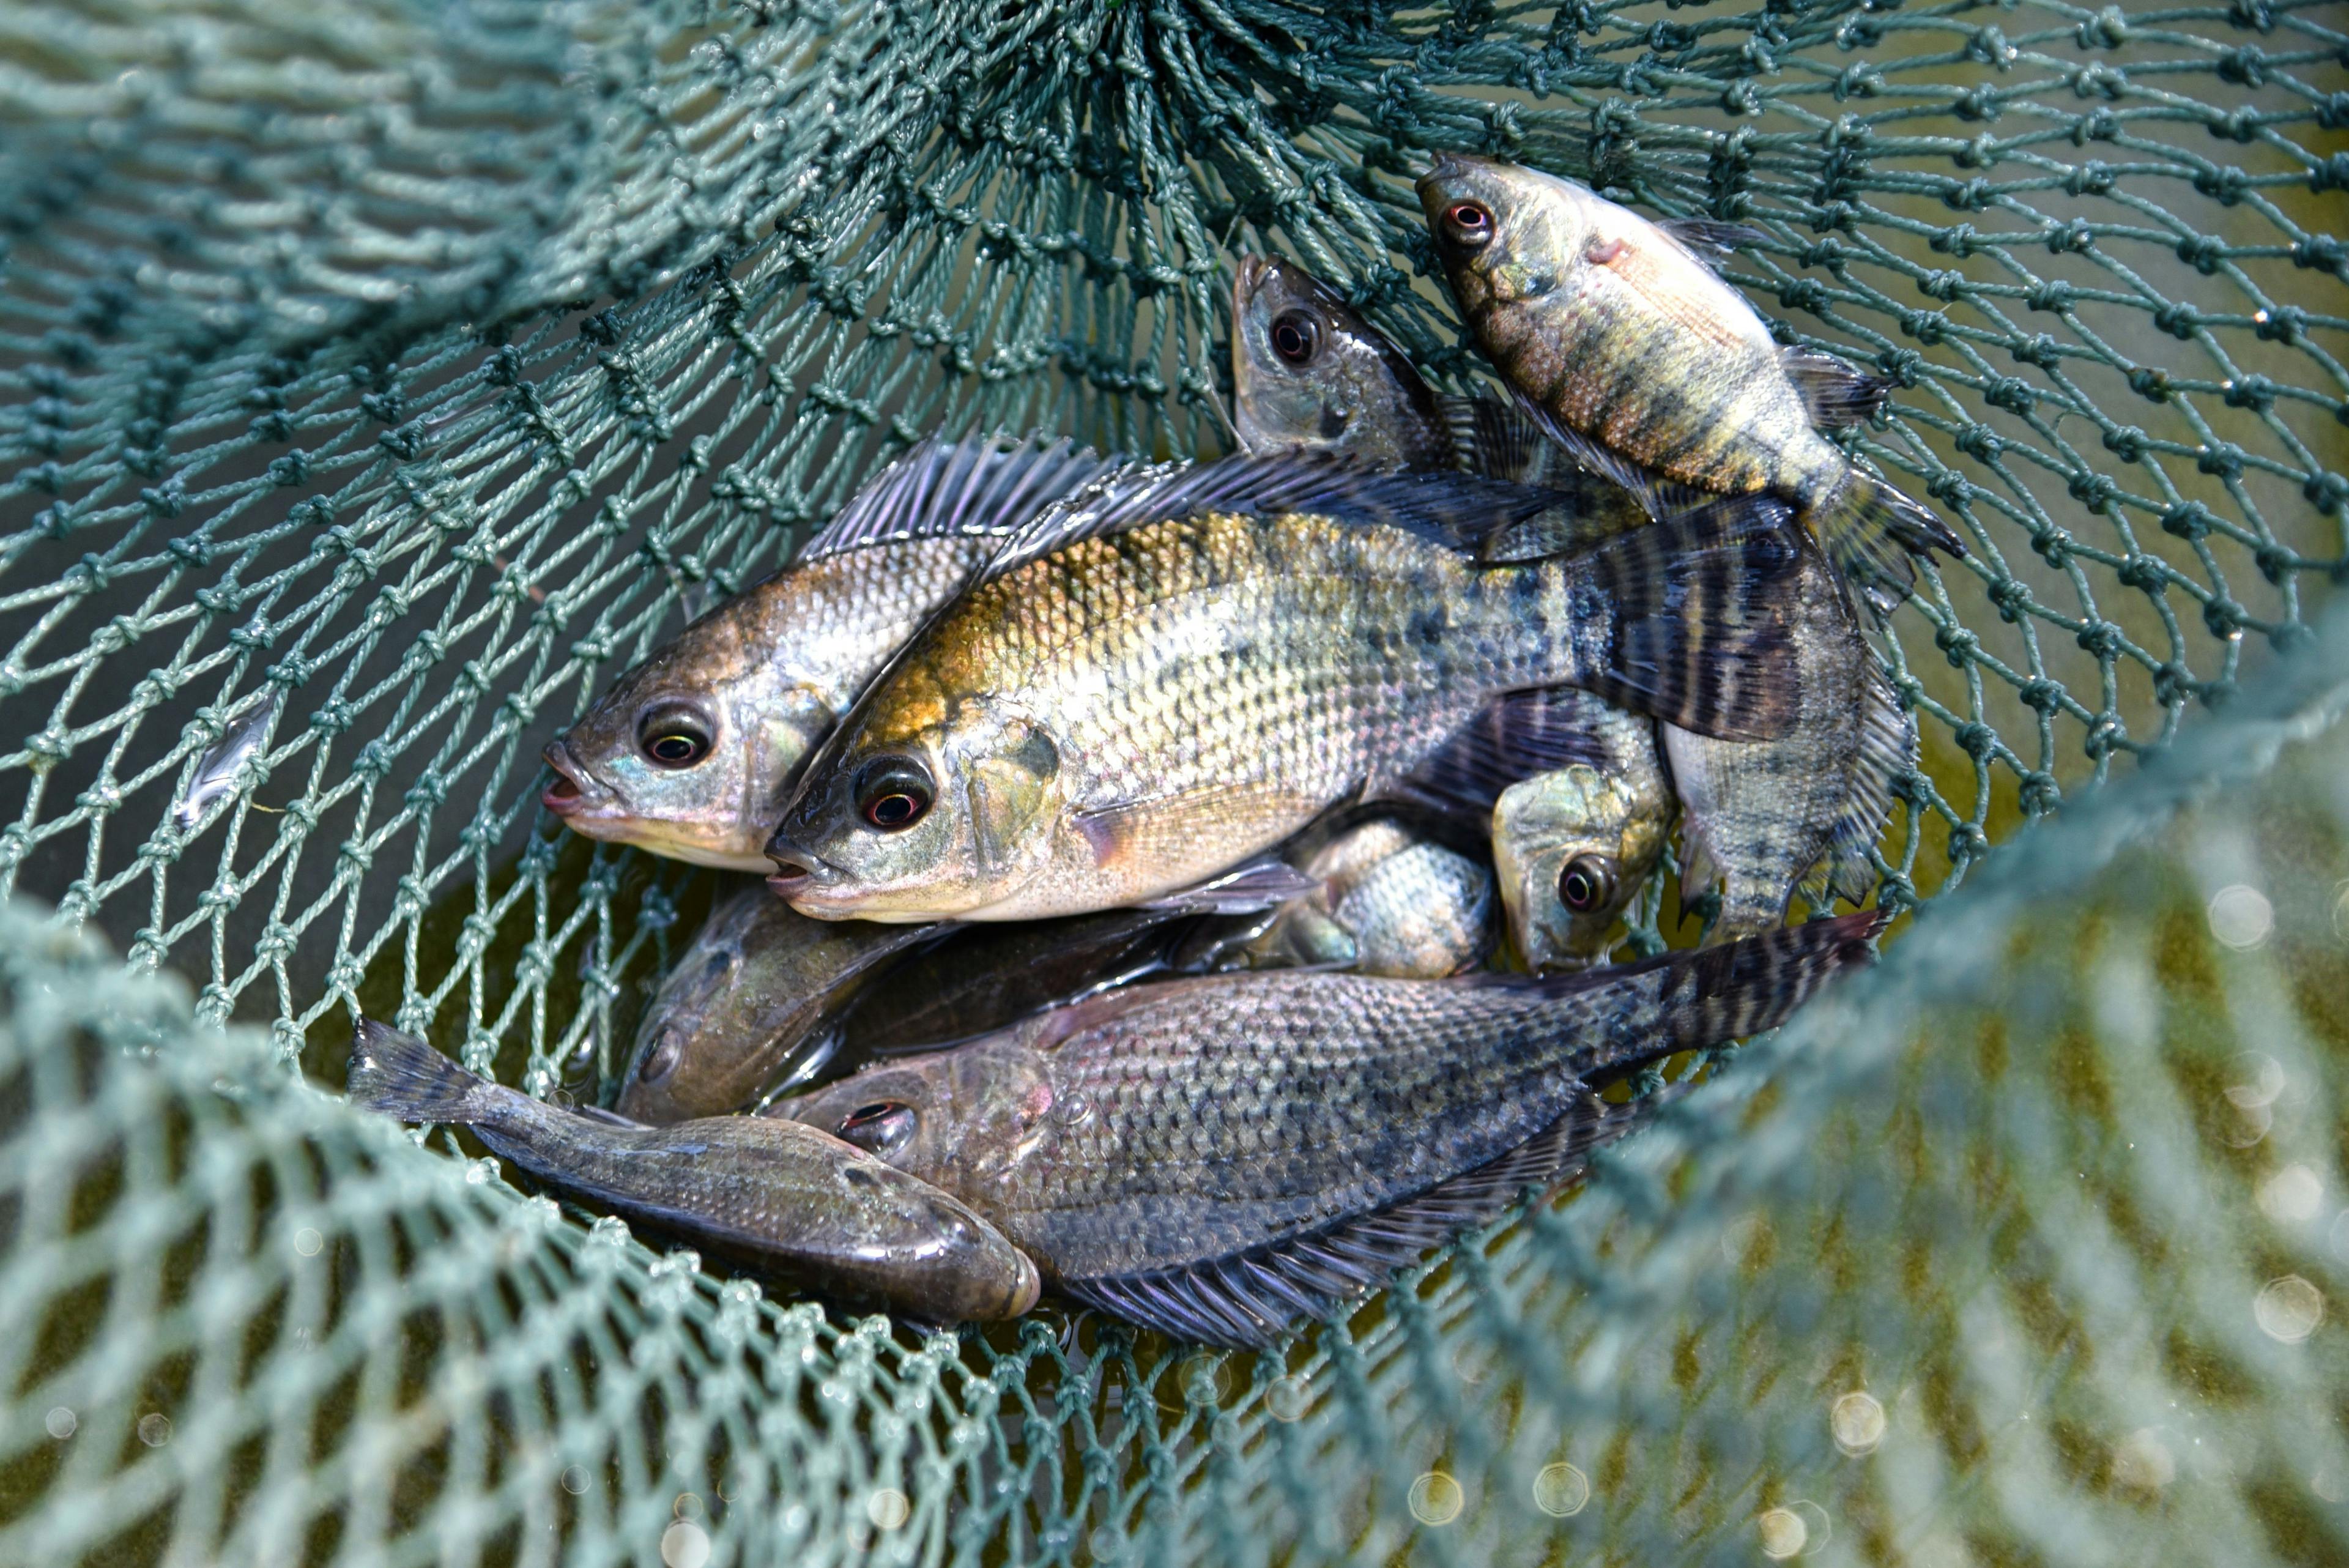 Using a fishing net, catch fish. Baby tilapia, tilapia fishbreeding and culture. | Image Credit: © TL23 photo - stock.adobe.com